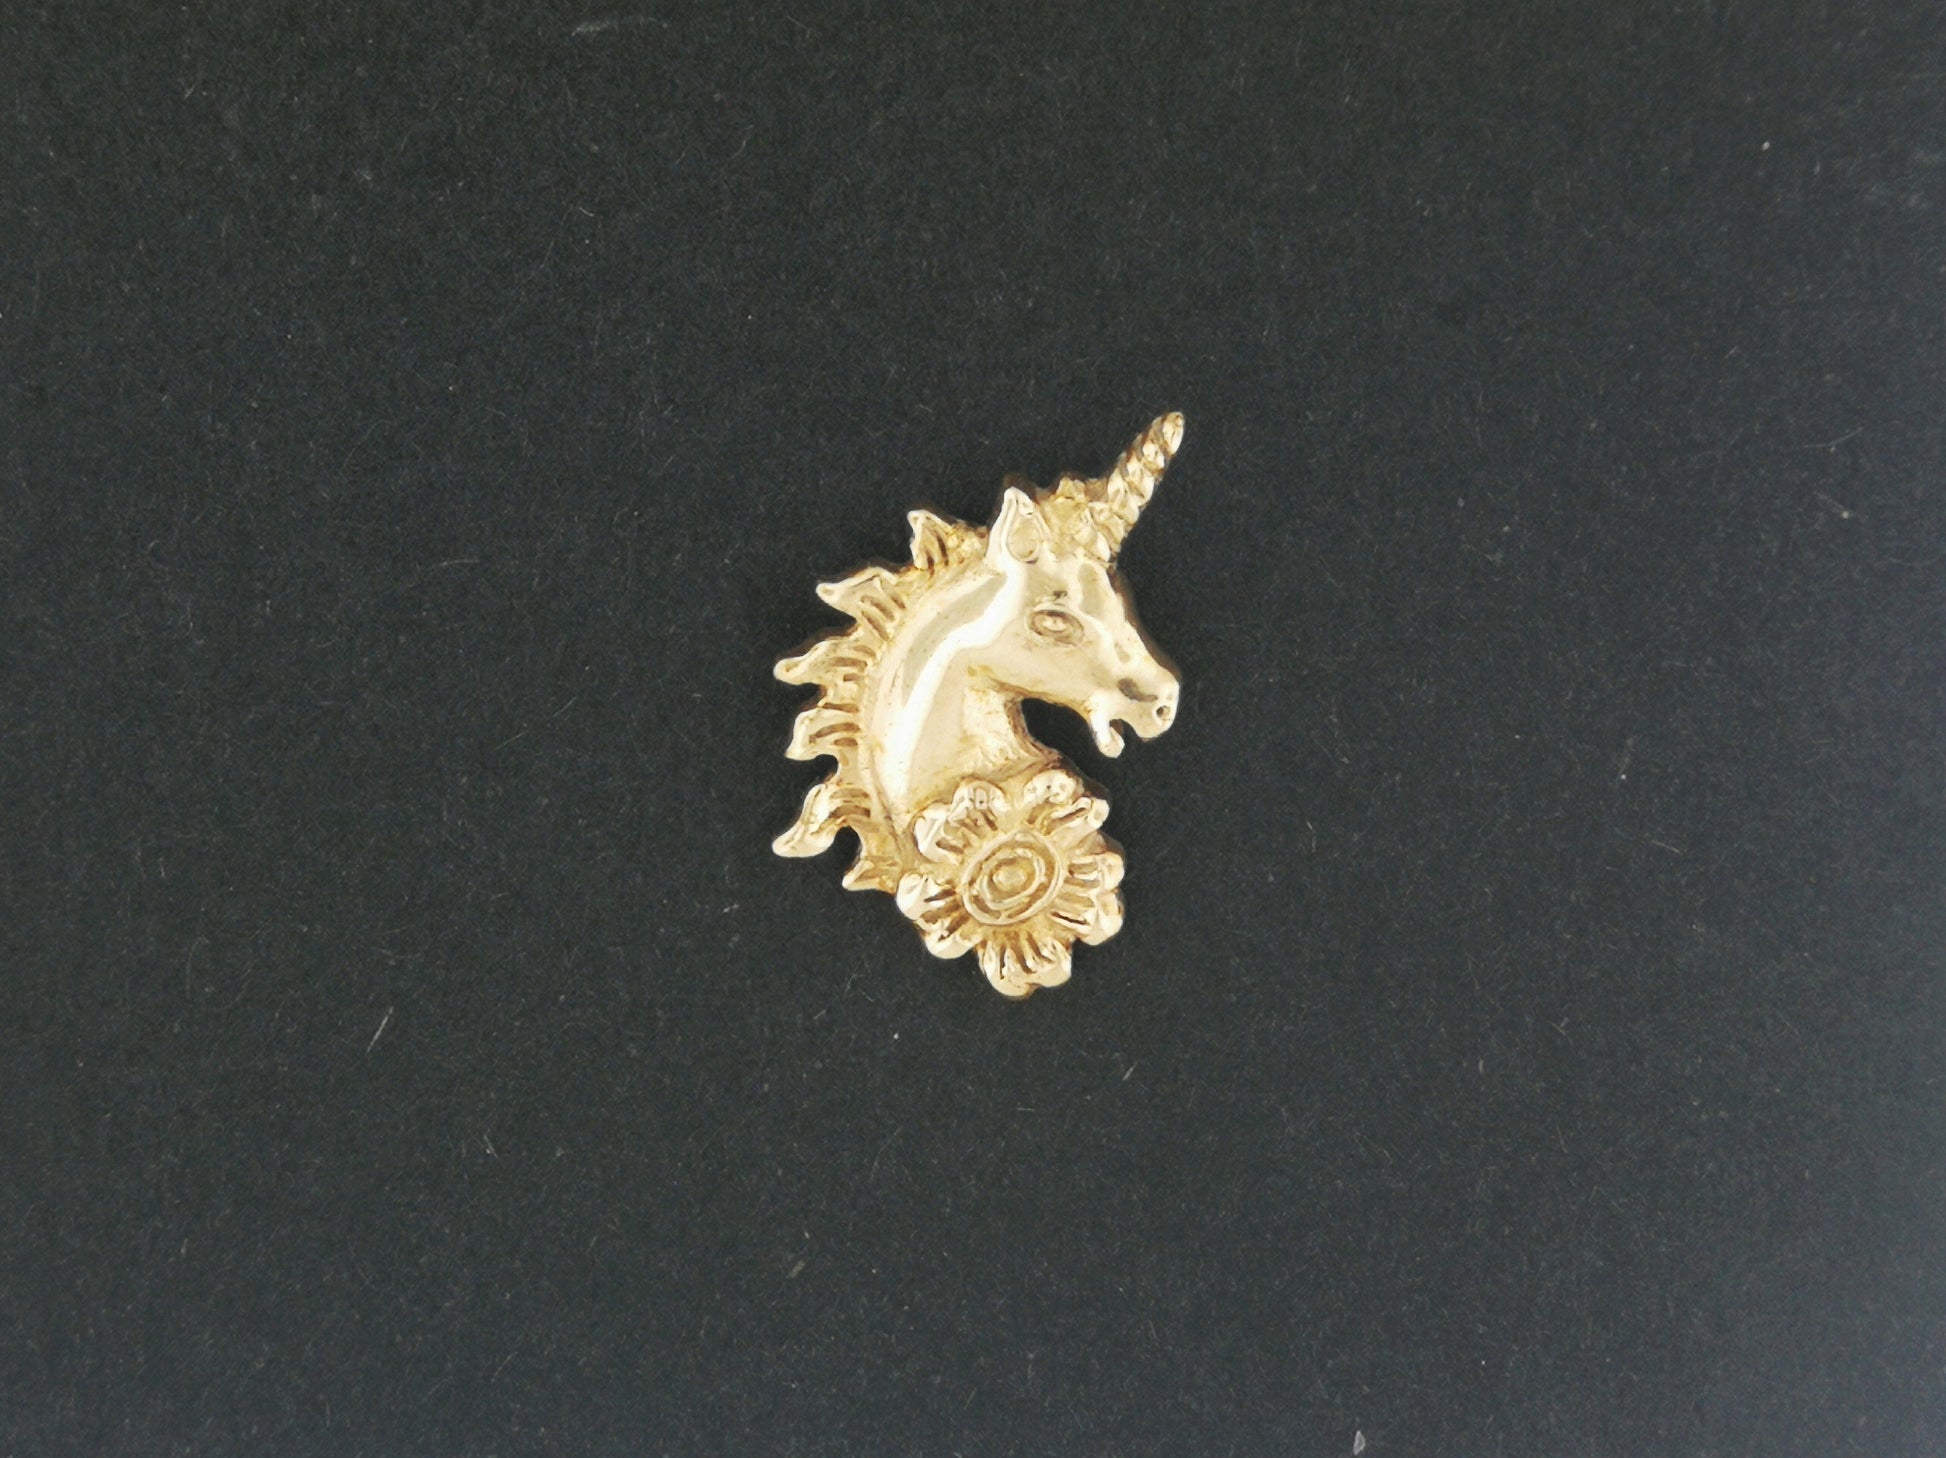 Unicorn Head Charm in Sterling Silver or Antique Bronze, Antique Bronze Unicorn Pendant, Bronze Unicorn Charm, Unicorn Flower Charm, Bronze Fantasy Jewellery, Bronze Fantasy Jewelry, Bronze Unicorn Jewelry, Bronze Unicorn Jewellery